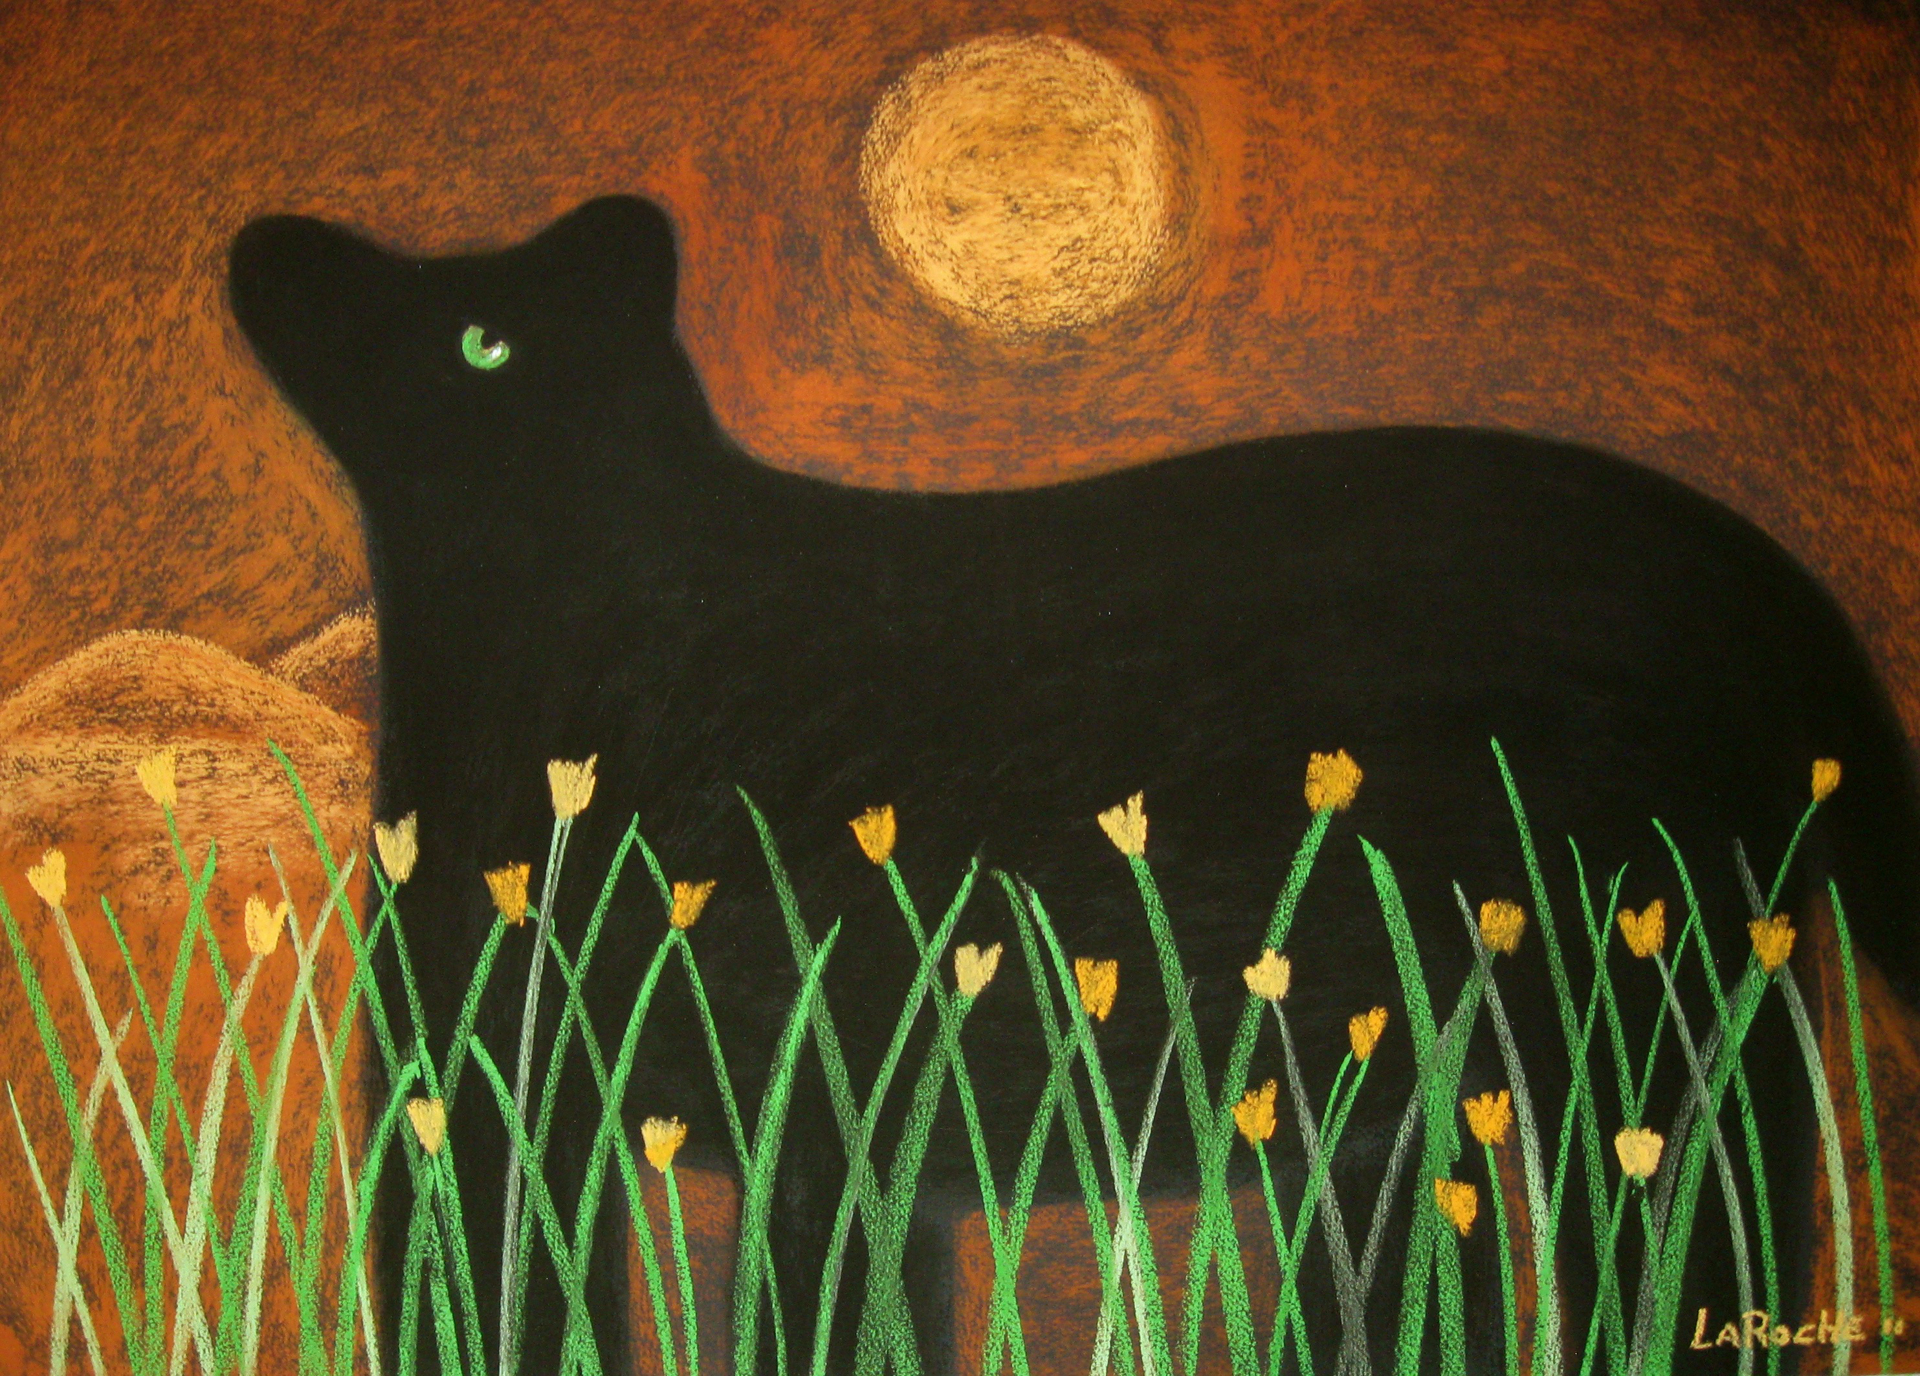 Black Bear/Moon -SOLD available for commission by Carole LaRoche